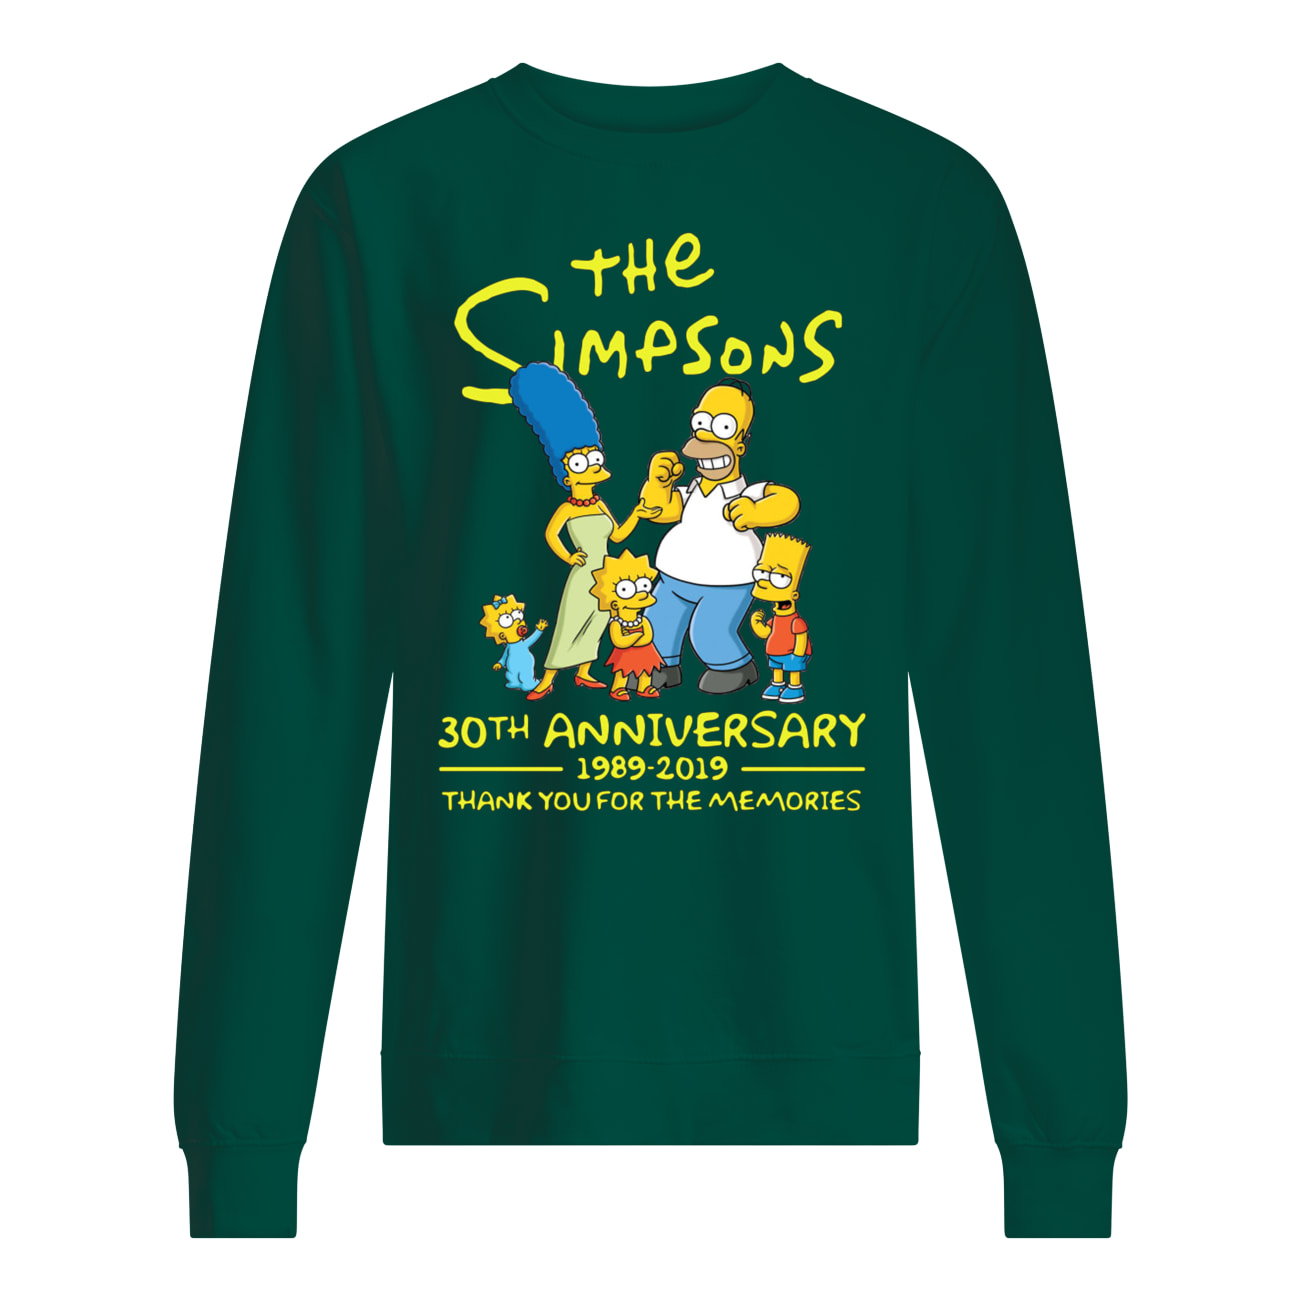 The simpsons 30th anniversary 1989-2019 thank you for memories sweatshirt